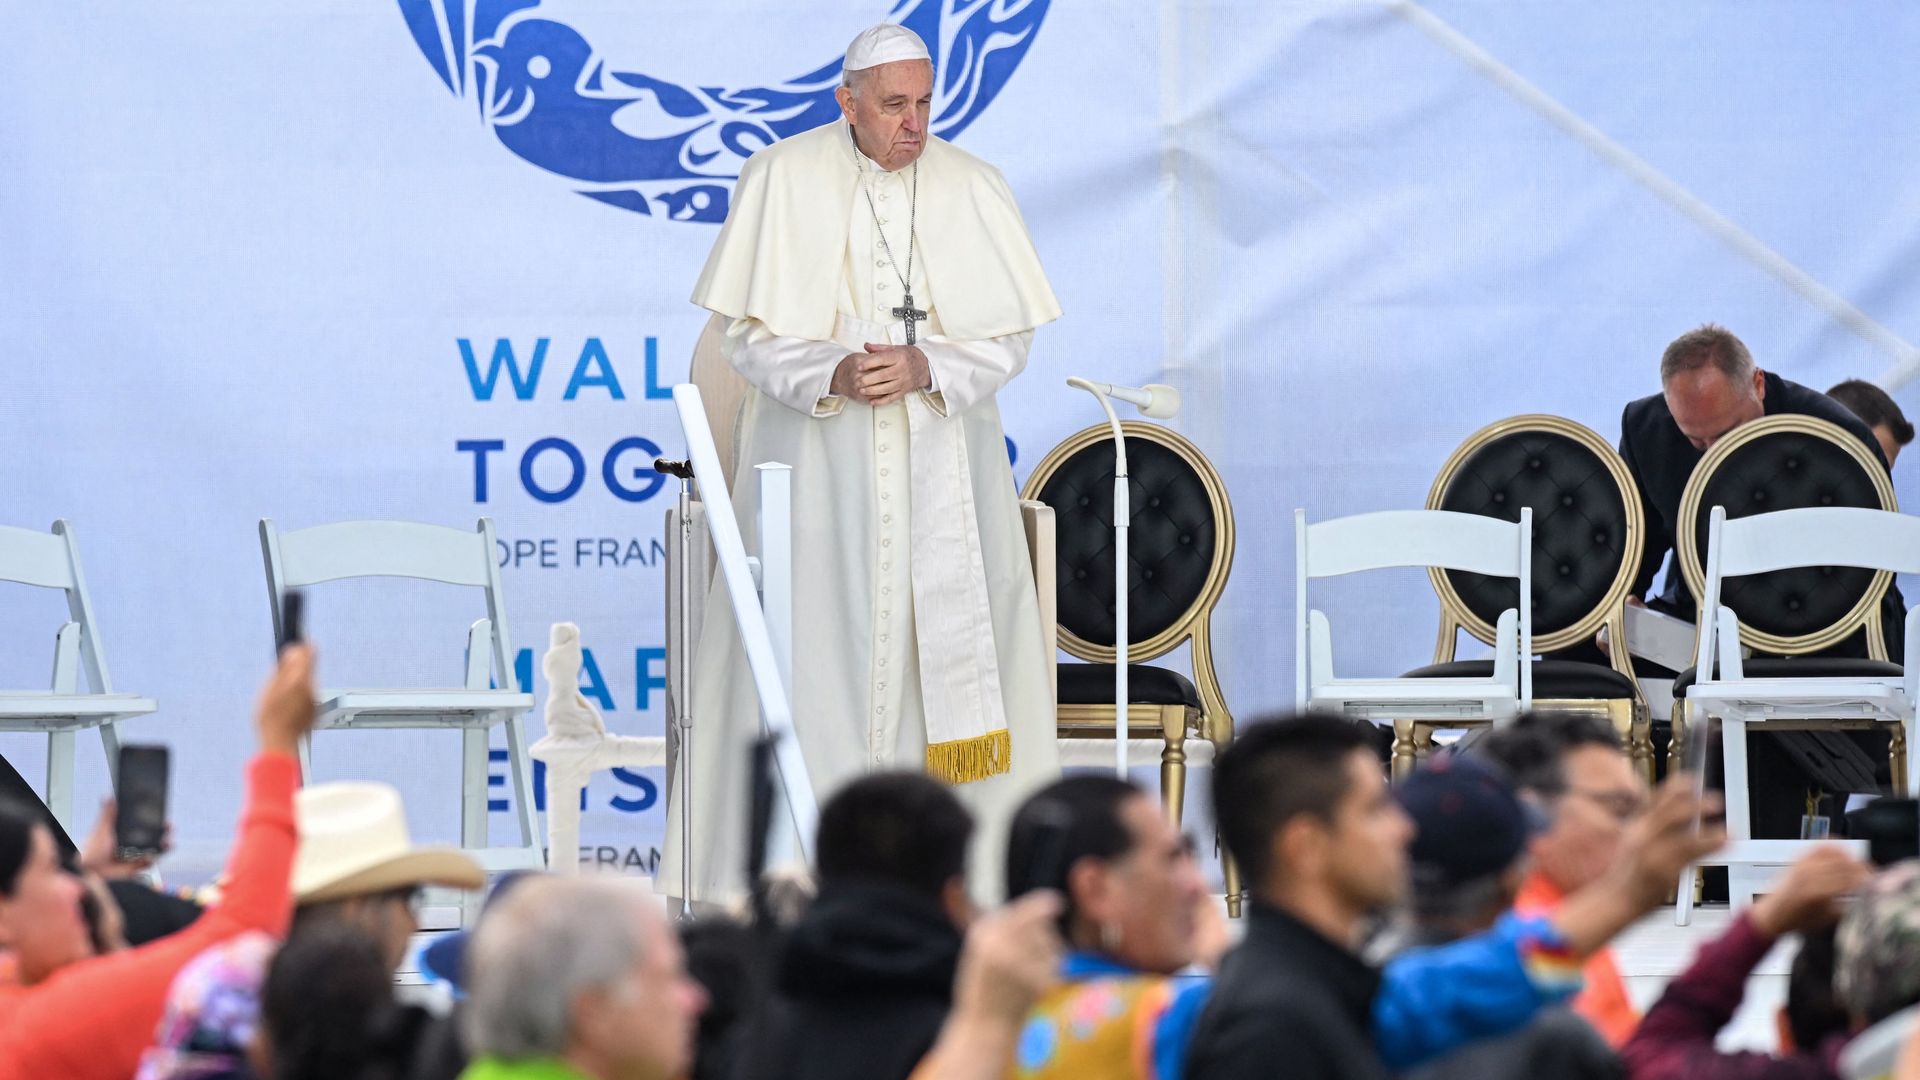 Pope Francis arrives to meet with Indigenous leaders at Muskwa Park in Maskwacis, Alberta, Canada, on July 25, 2022.